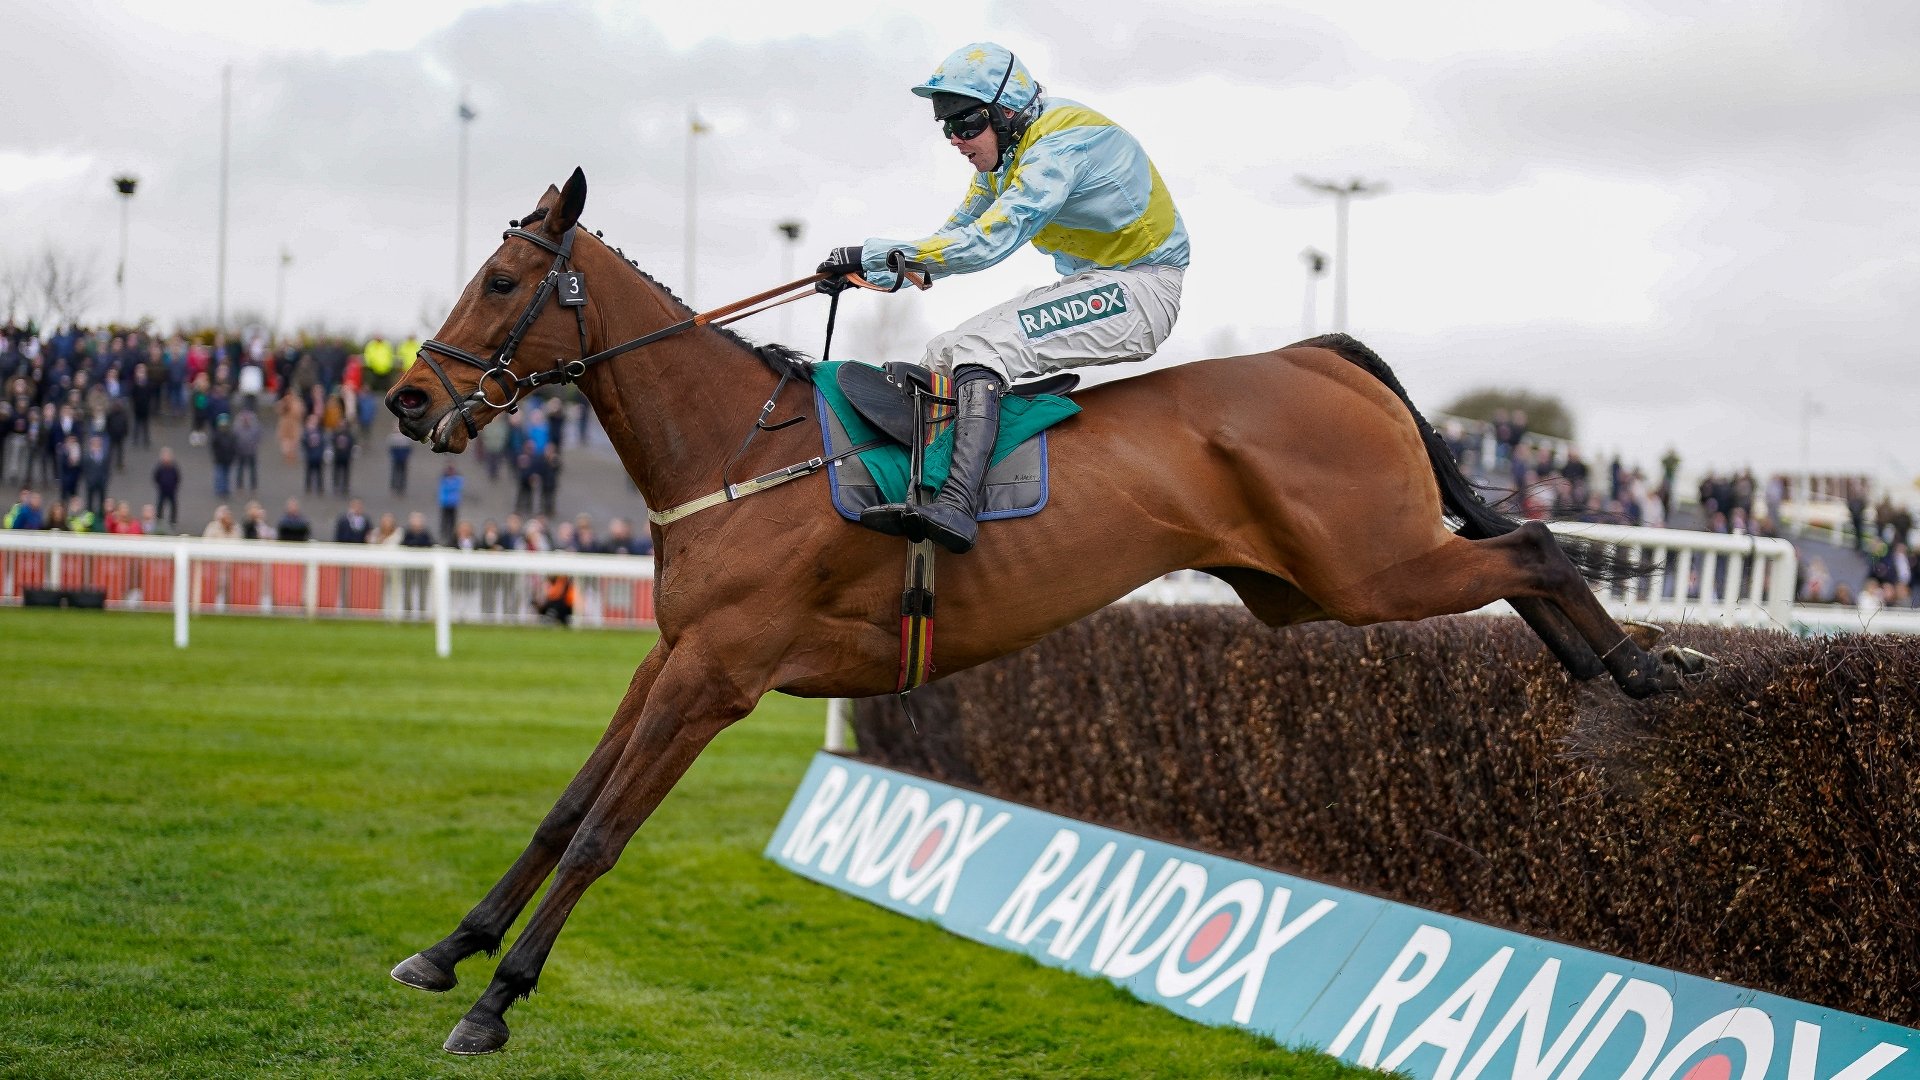 2023 Marsh Chase Tips - Woods and Hales to taste more Aintree success?